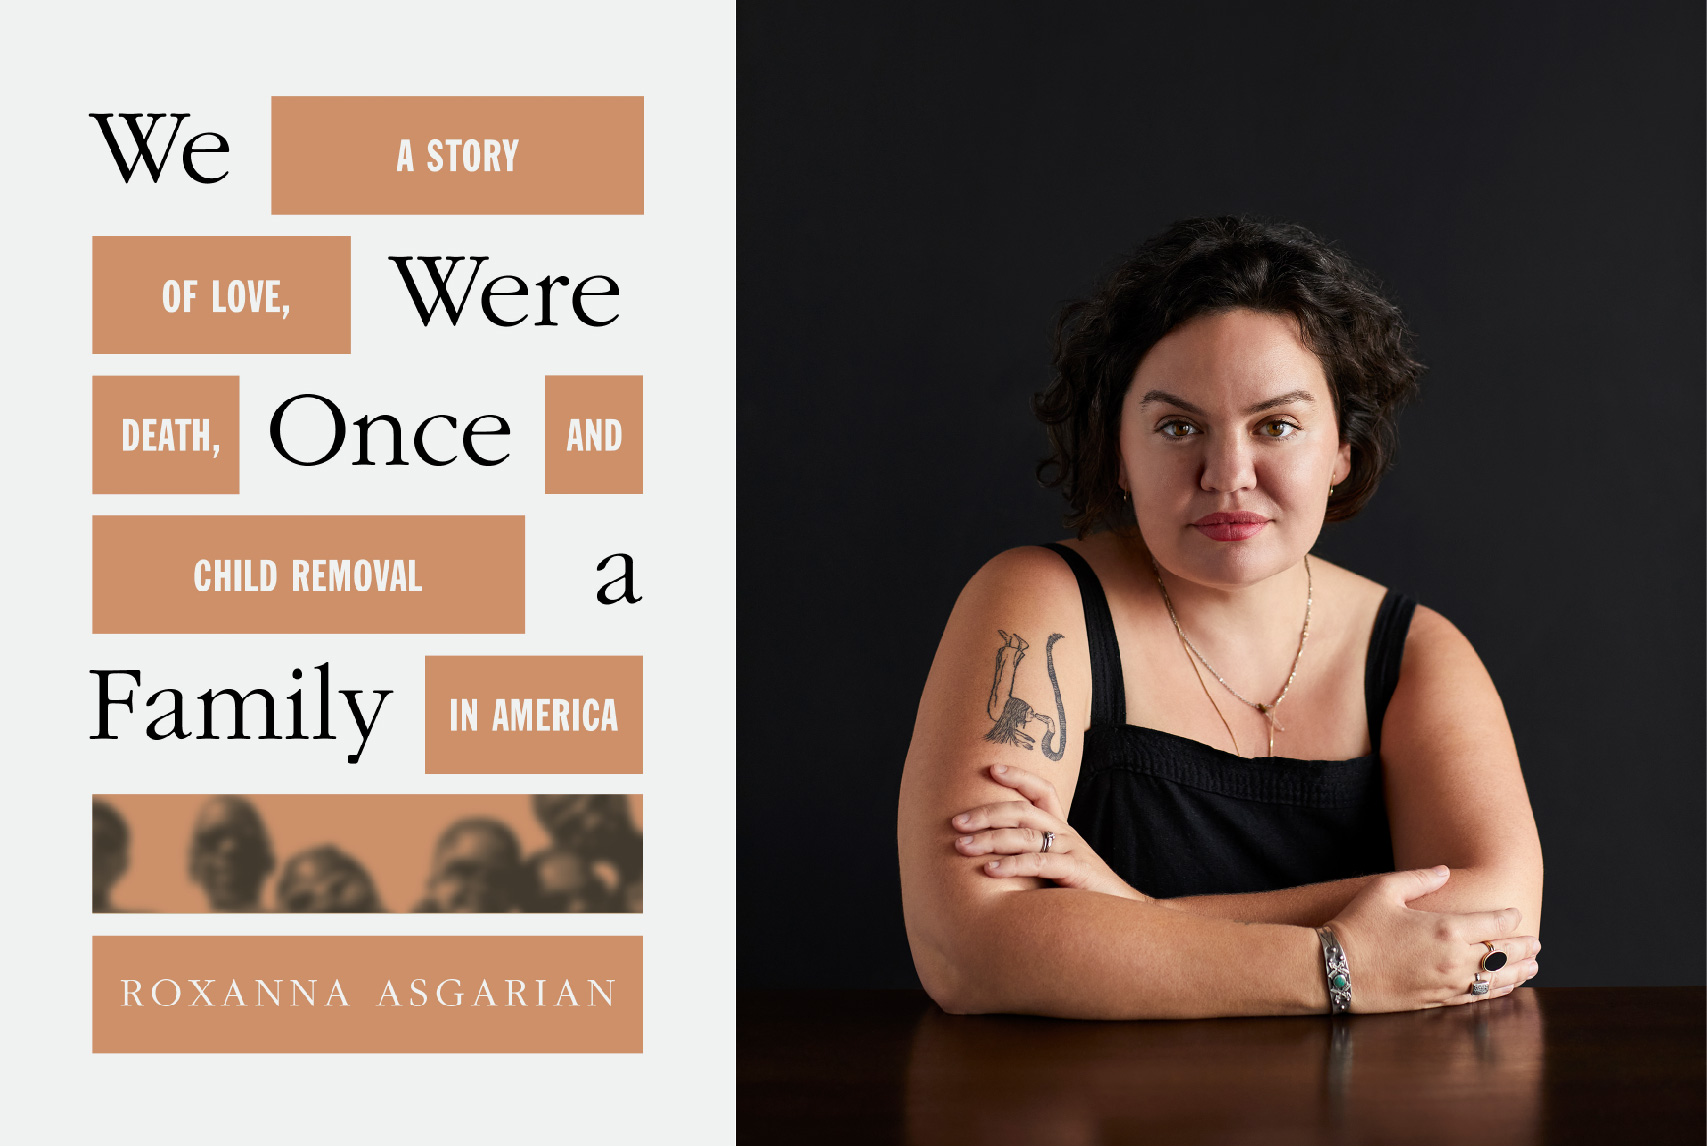 Image showing the cover of a book on the left [We Were Once A Family: A Story of Love, Death, and Child Removal in America; Roxanna Asgarian] and a photo of Roxanna Asgarian.